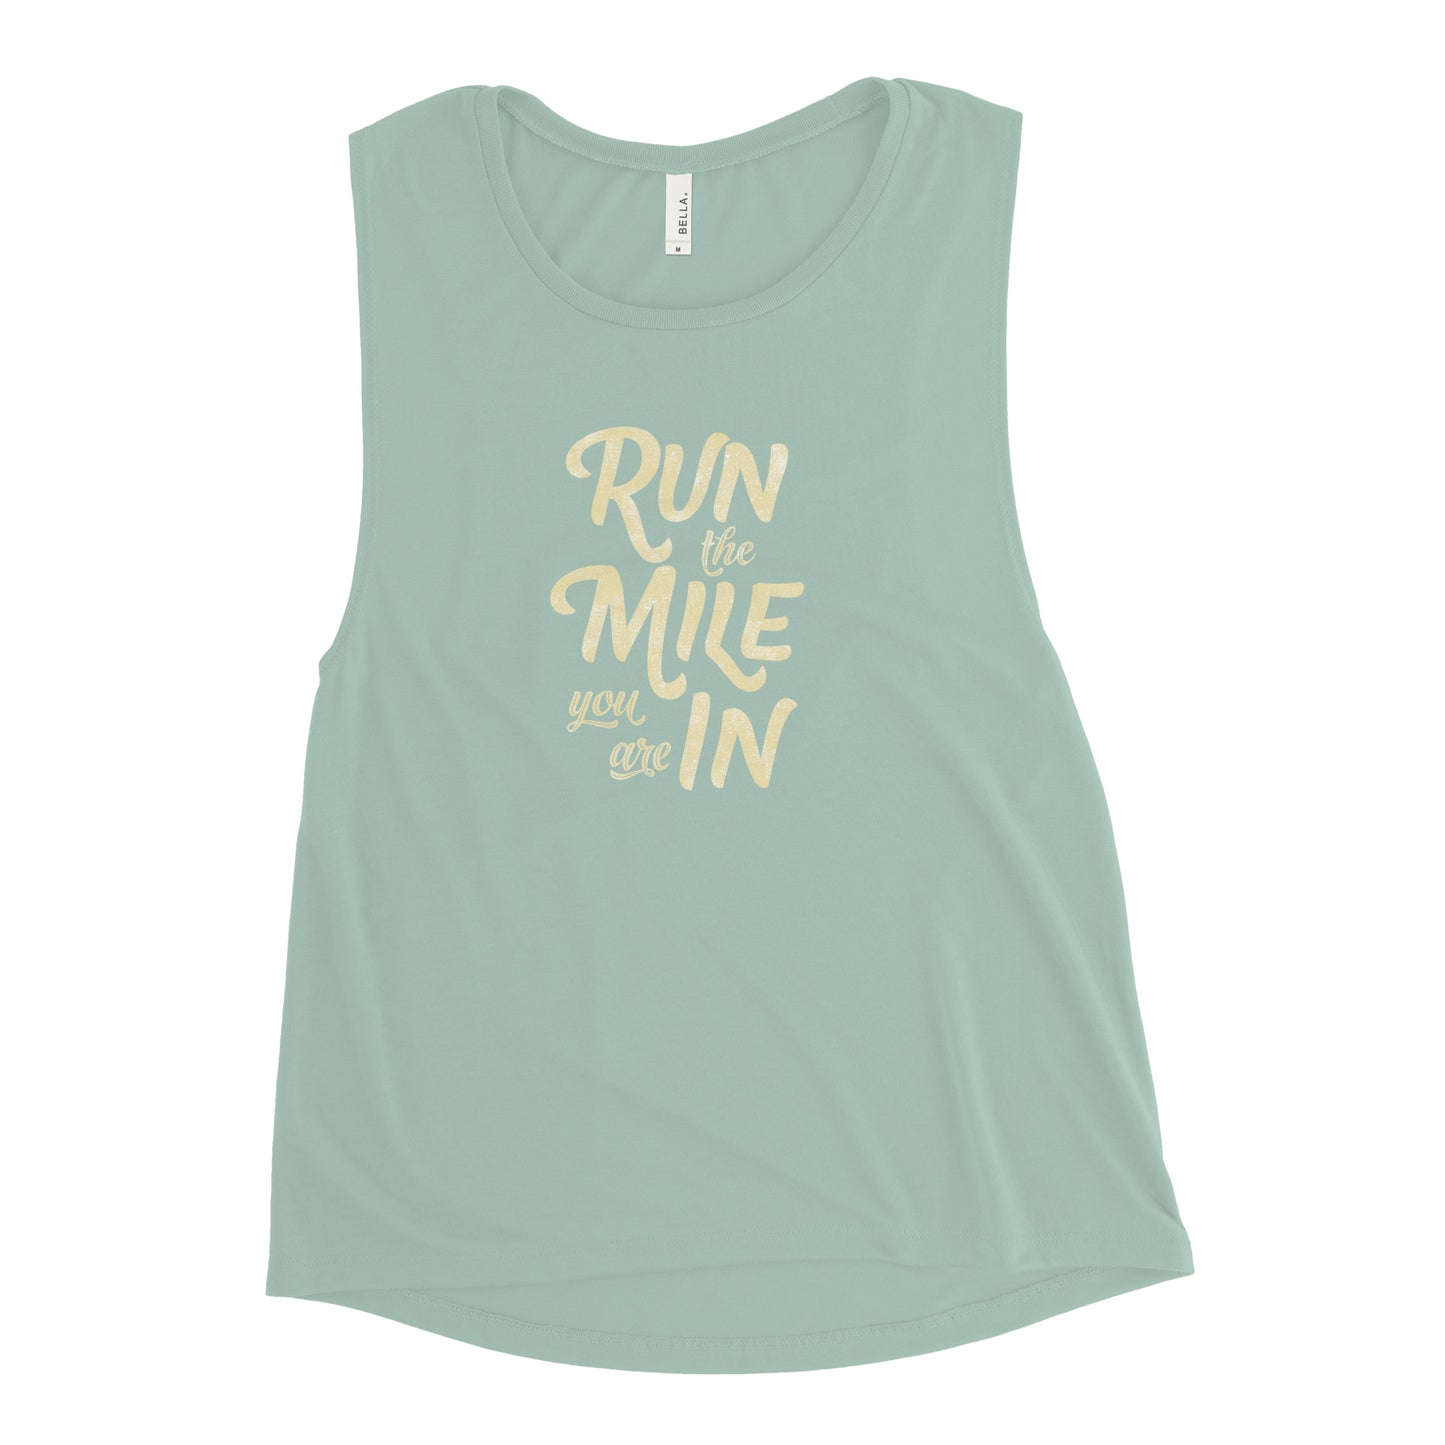 Run the Mile You Are In Distressed Women's Muscle Tank